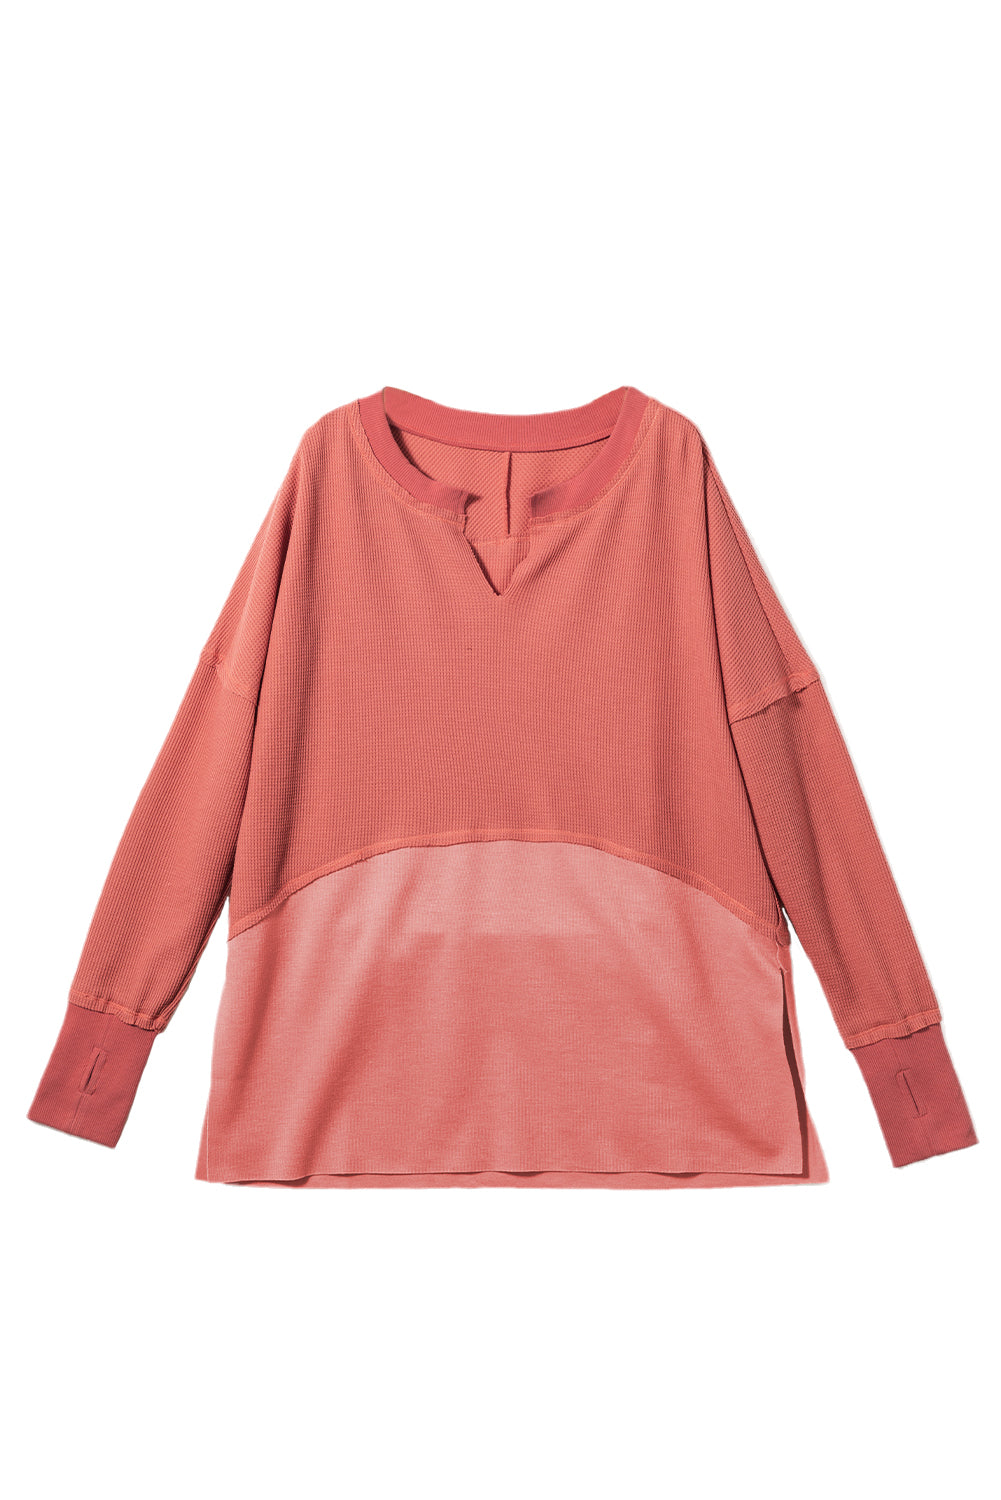 Mineral Red Exposed Seam Slit Neck Waffle Knit Patchwork Top